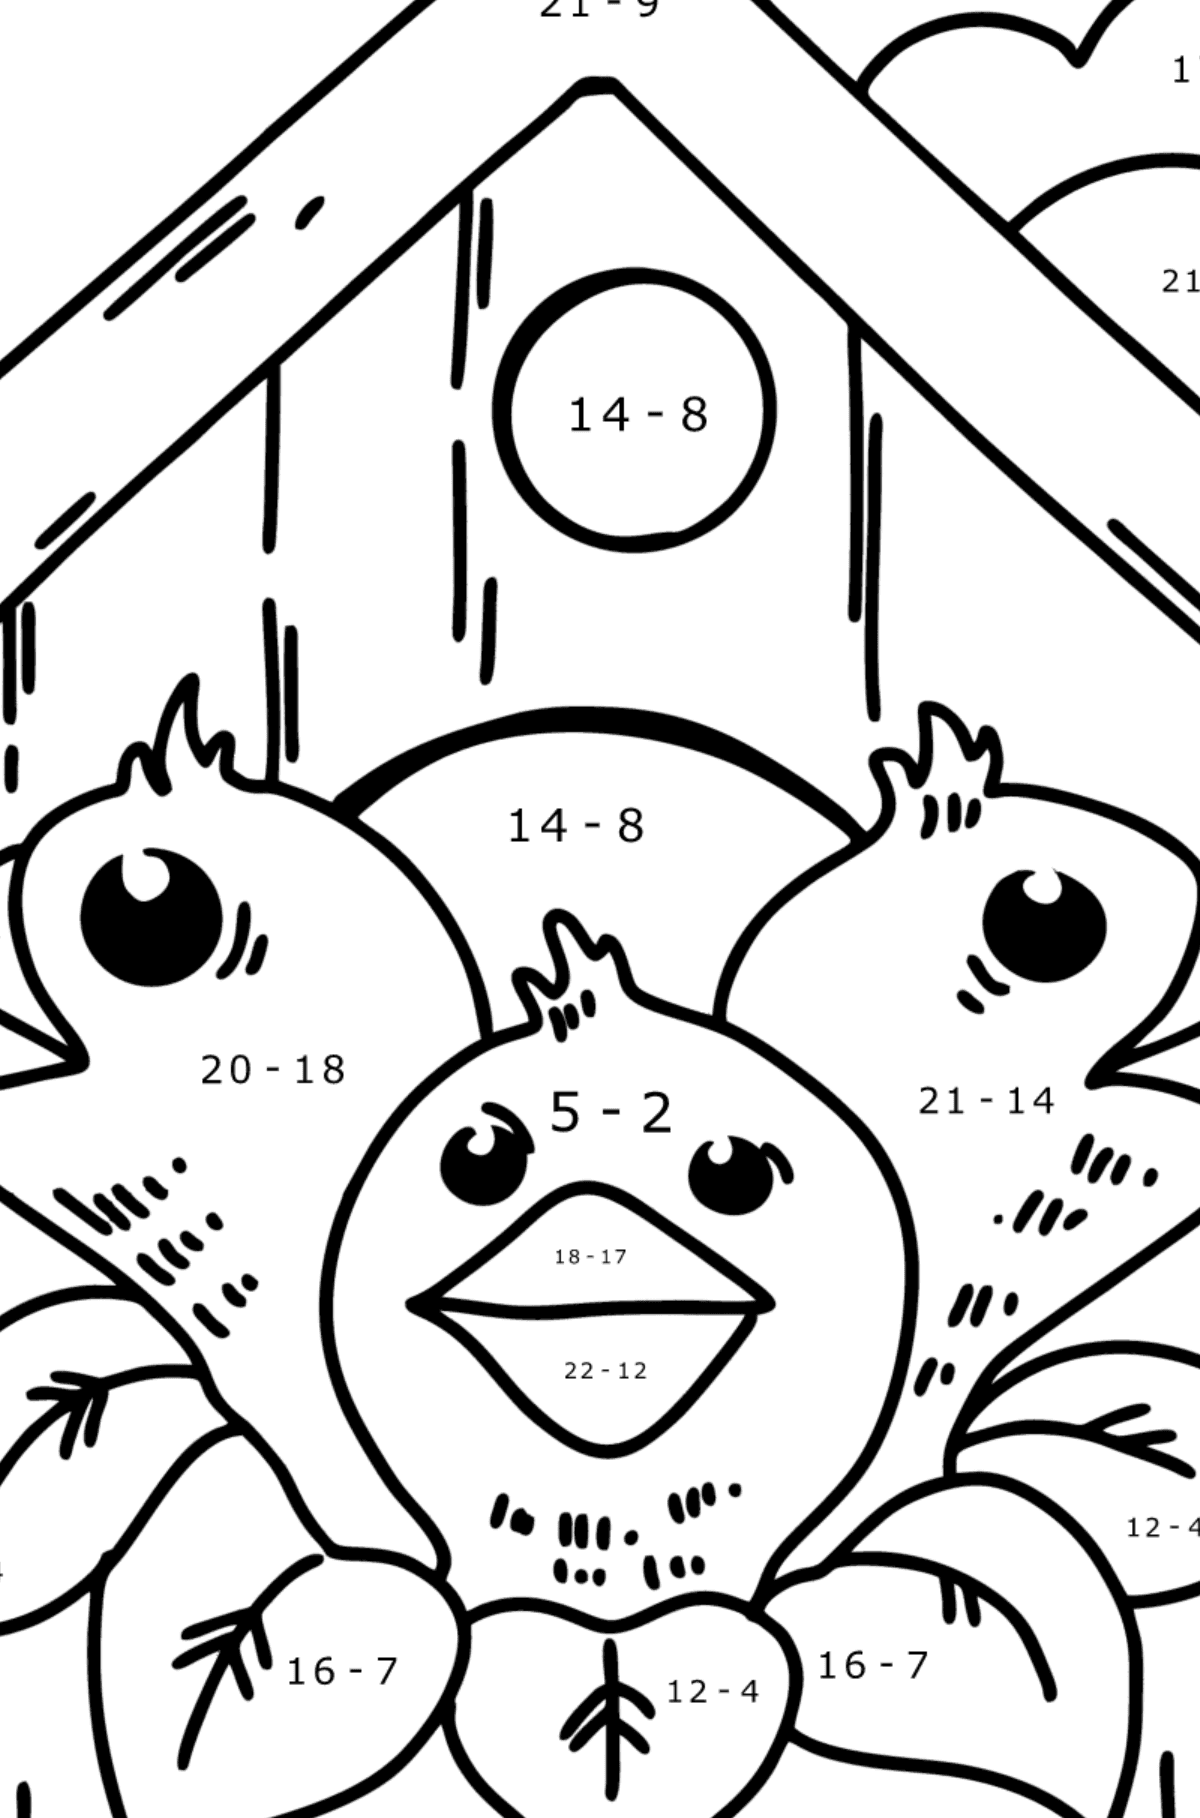 Chicks in a Birdhouse coloring page - Math Coloring - Subtraction for Kids